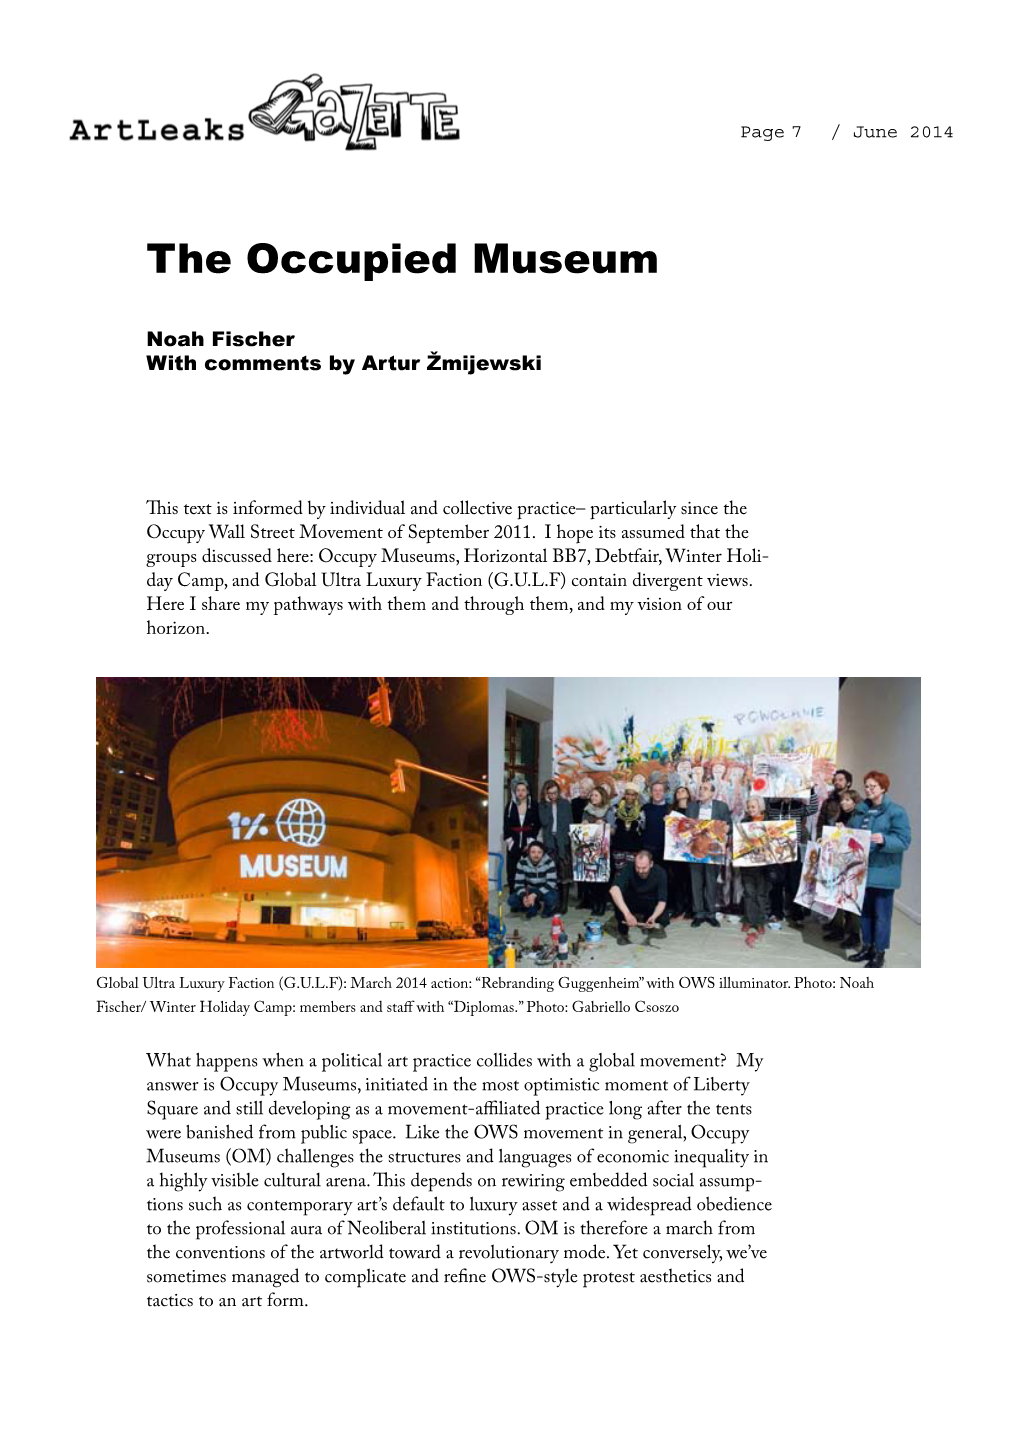 The Occupied Museum